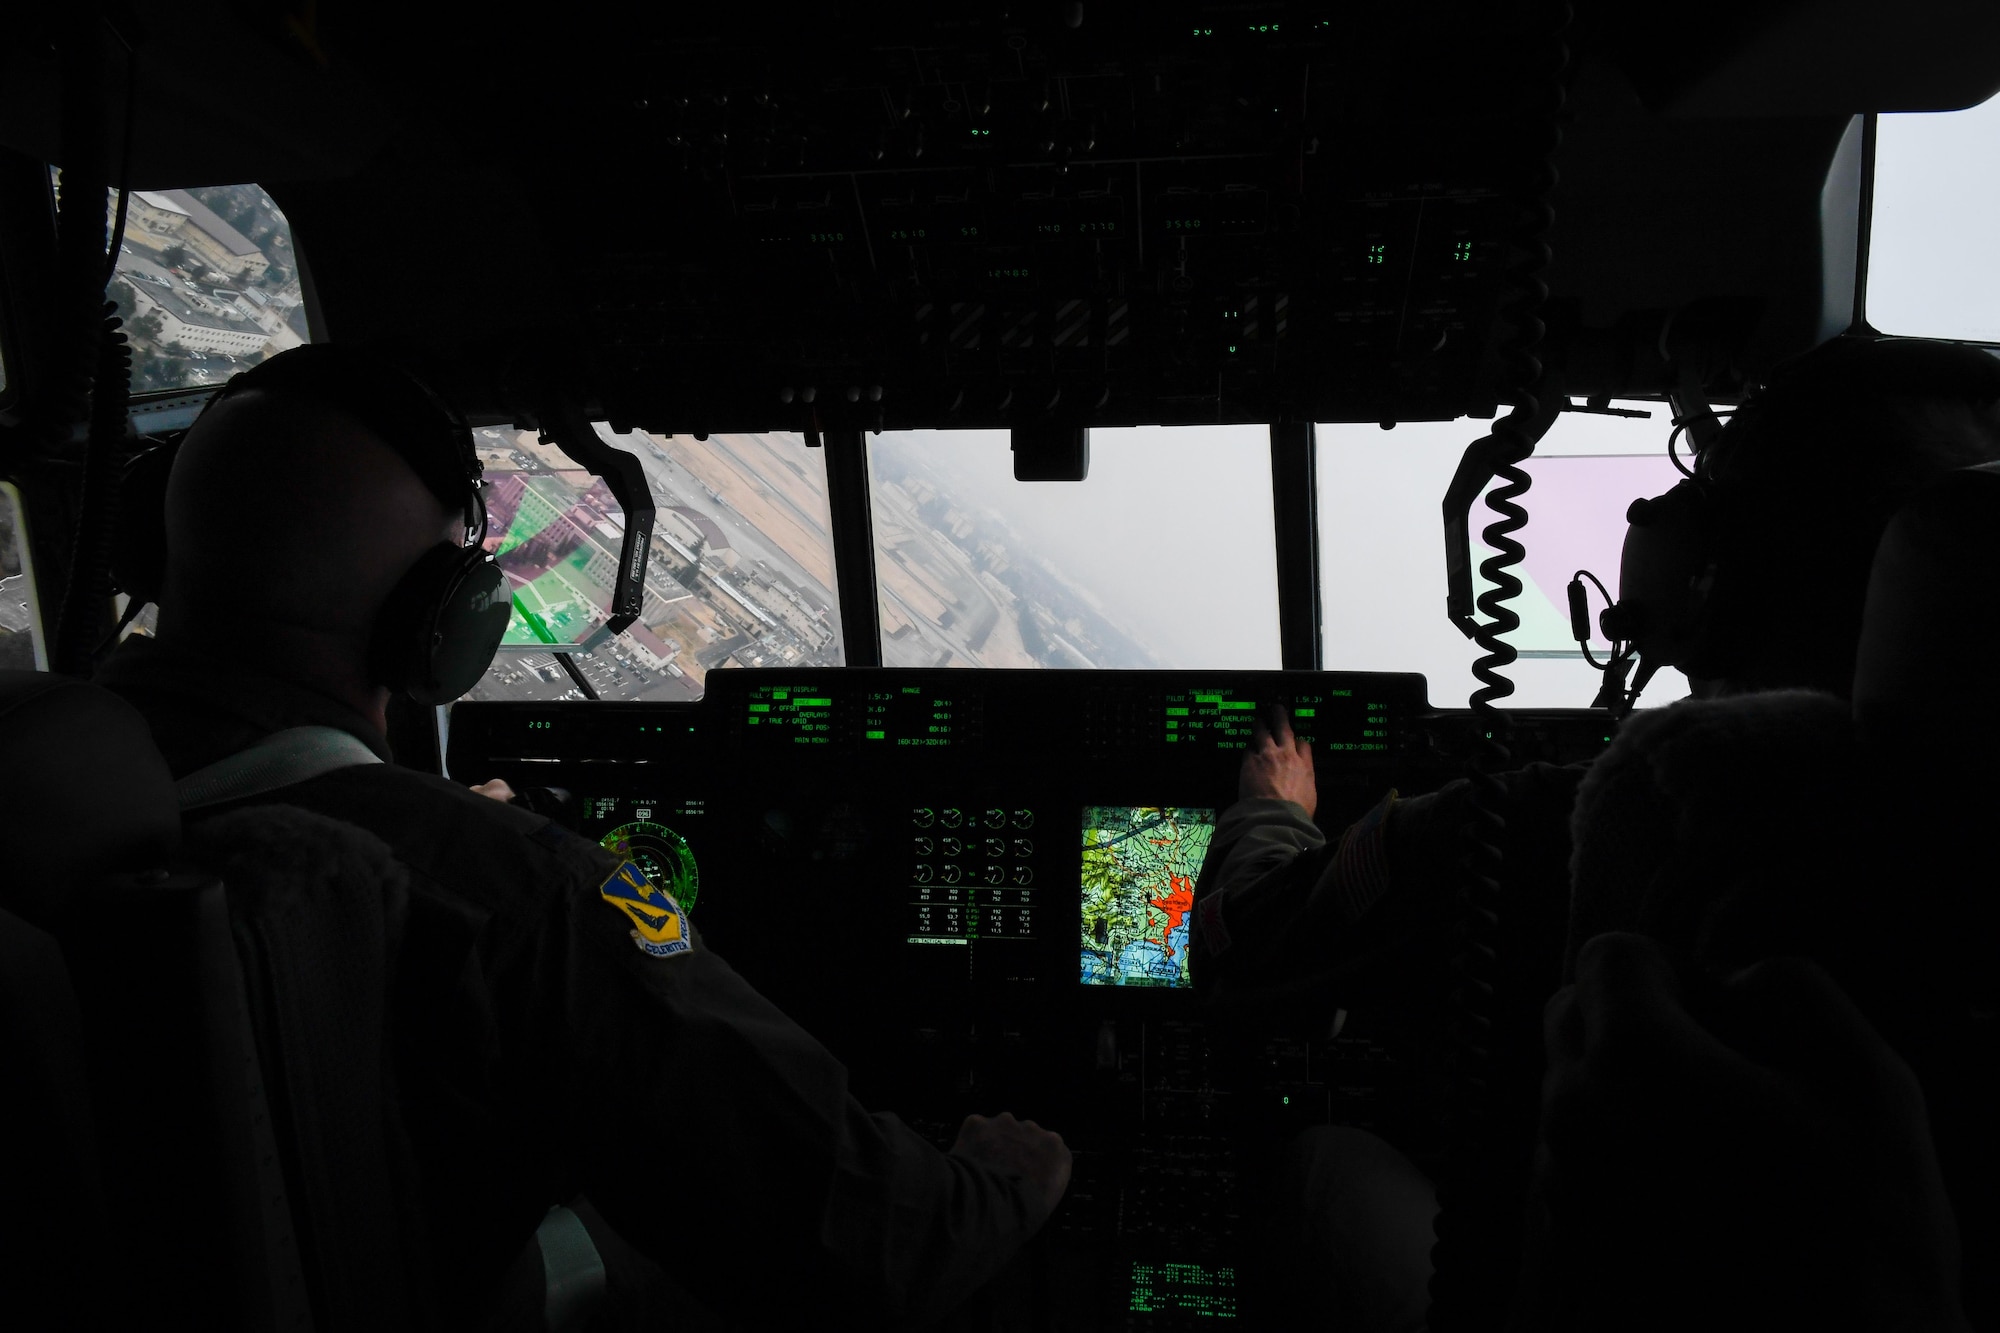 Col. Kenneth Moss, 374th Airlift Wing commander, and Maj. Jesse Klaetsch, 36th Airlift Squadron C-130J pilot, approach for a landing at Yokota Air Base, Japan, March 6, 2017. This is the first C-130J to be assigned to Pacific Air Forces.  Yokota serves as the primary Western Pacific airlift hub for U.S. Air Force peacetime and contingency operations. Missions include tactical air land, airdrop, aeromedical evacuation, special operations and distinguished visitor airlift. (U.S. Air Force photo by Staff Sgt. Michael Smith)